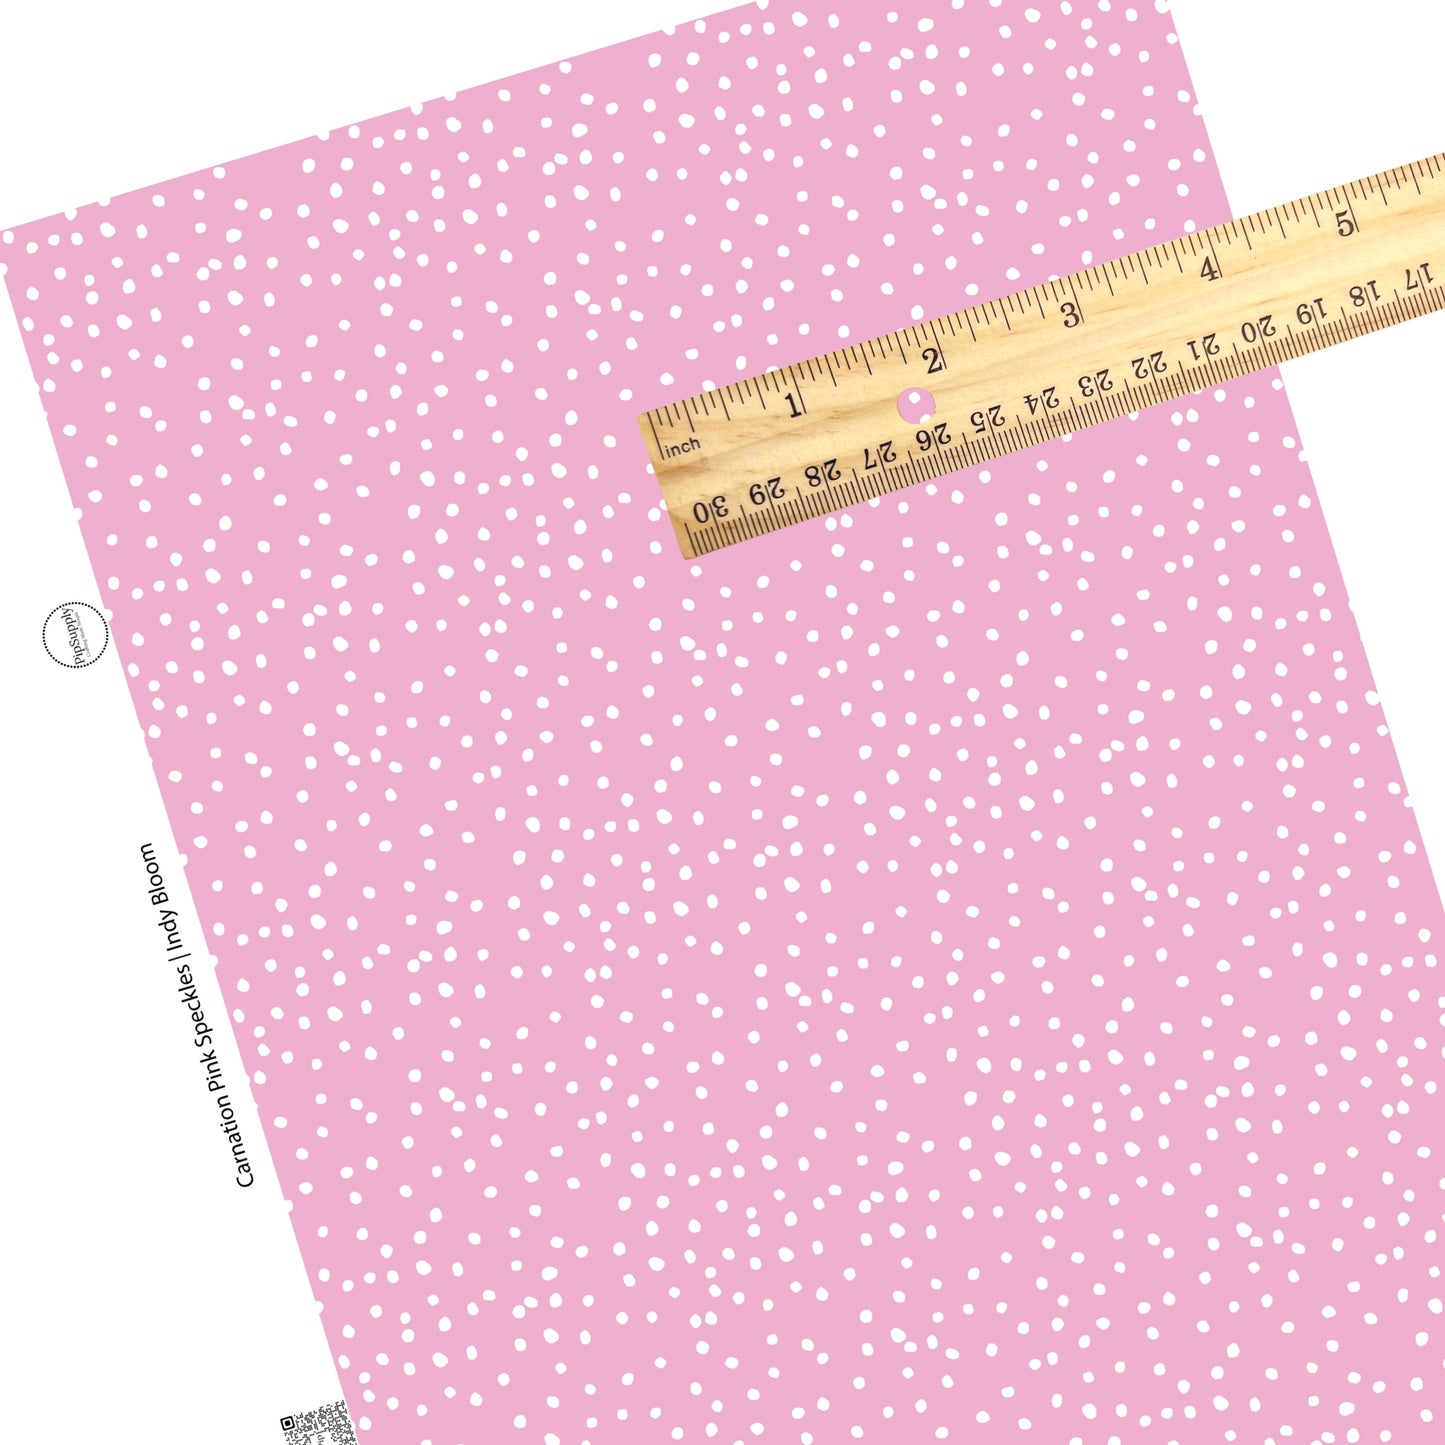 White polka dots on pink faux leather sheets